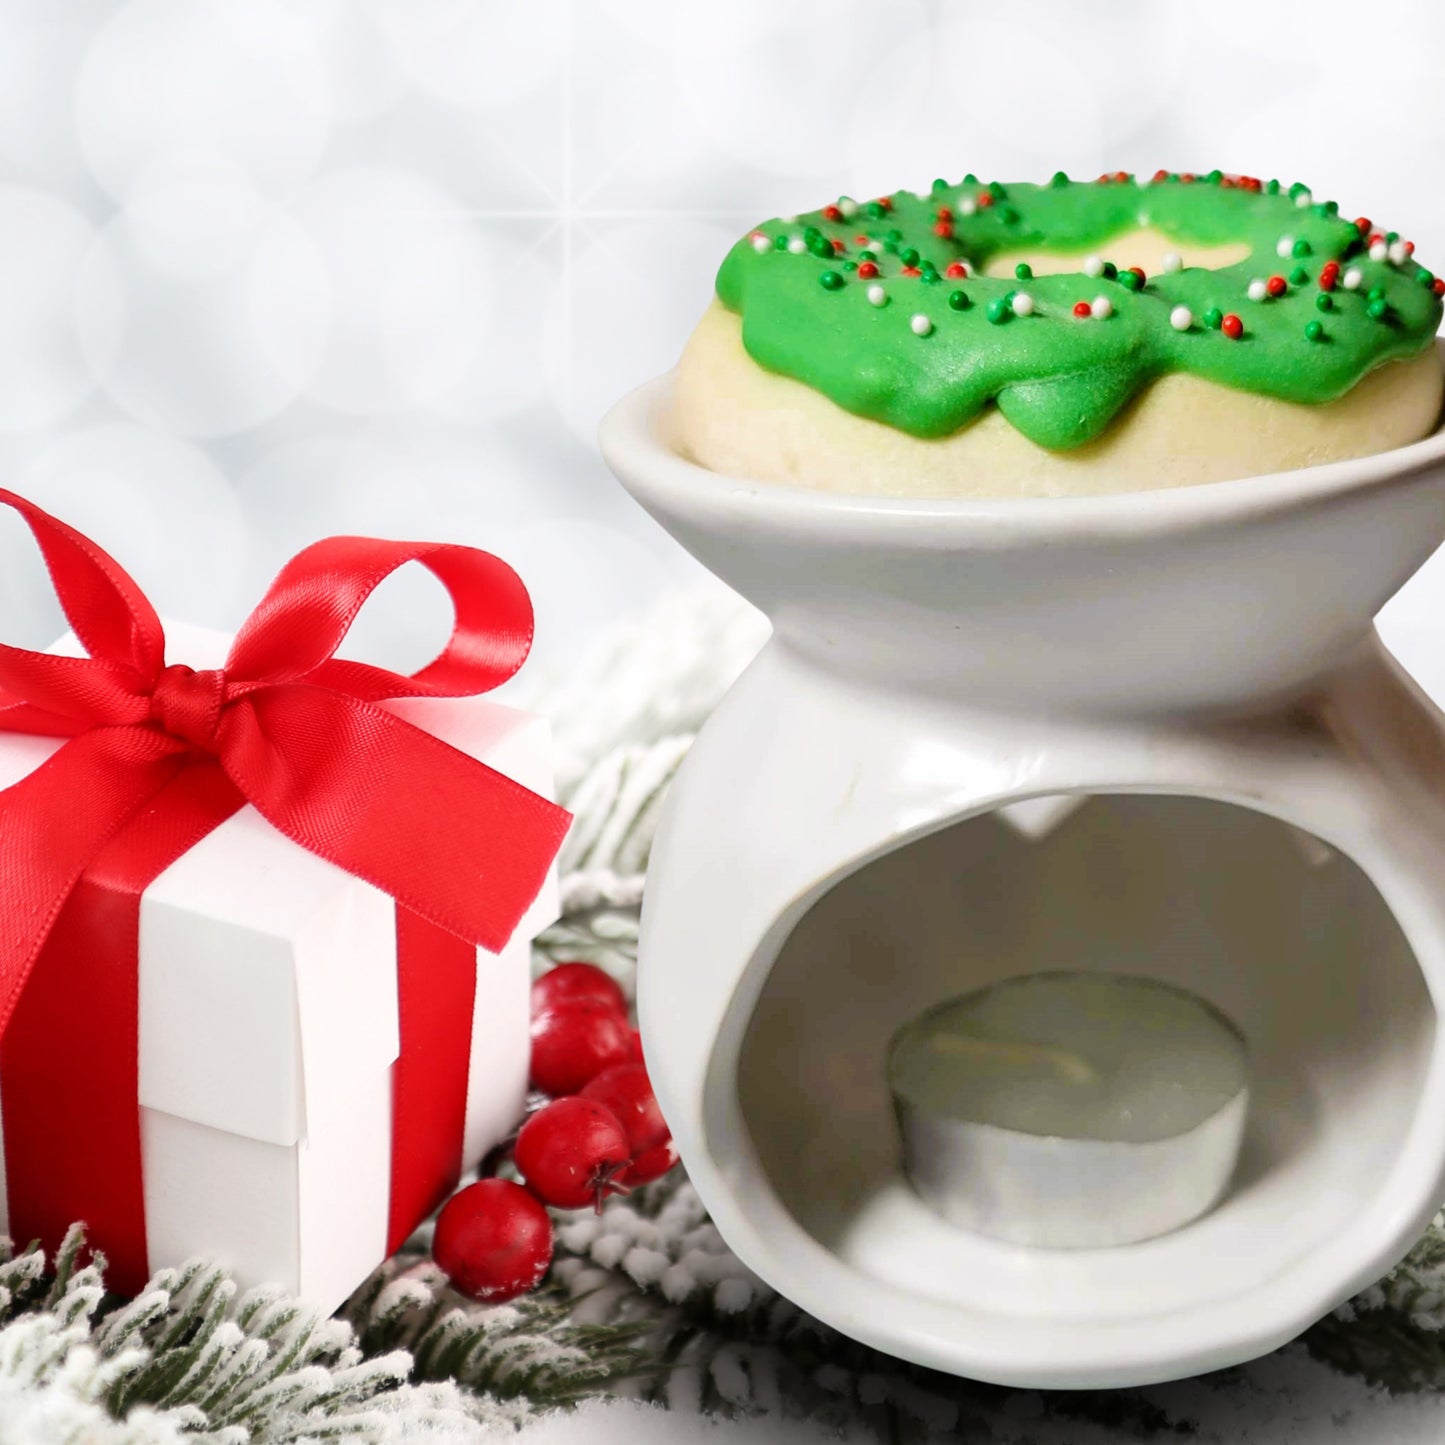 Cafe Delights Christmas Sugar Donut Scented Soy Wax Melt & Warmer Gift Set